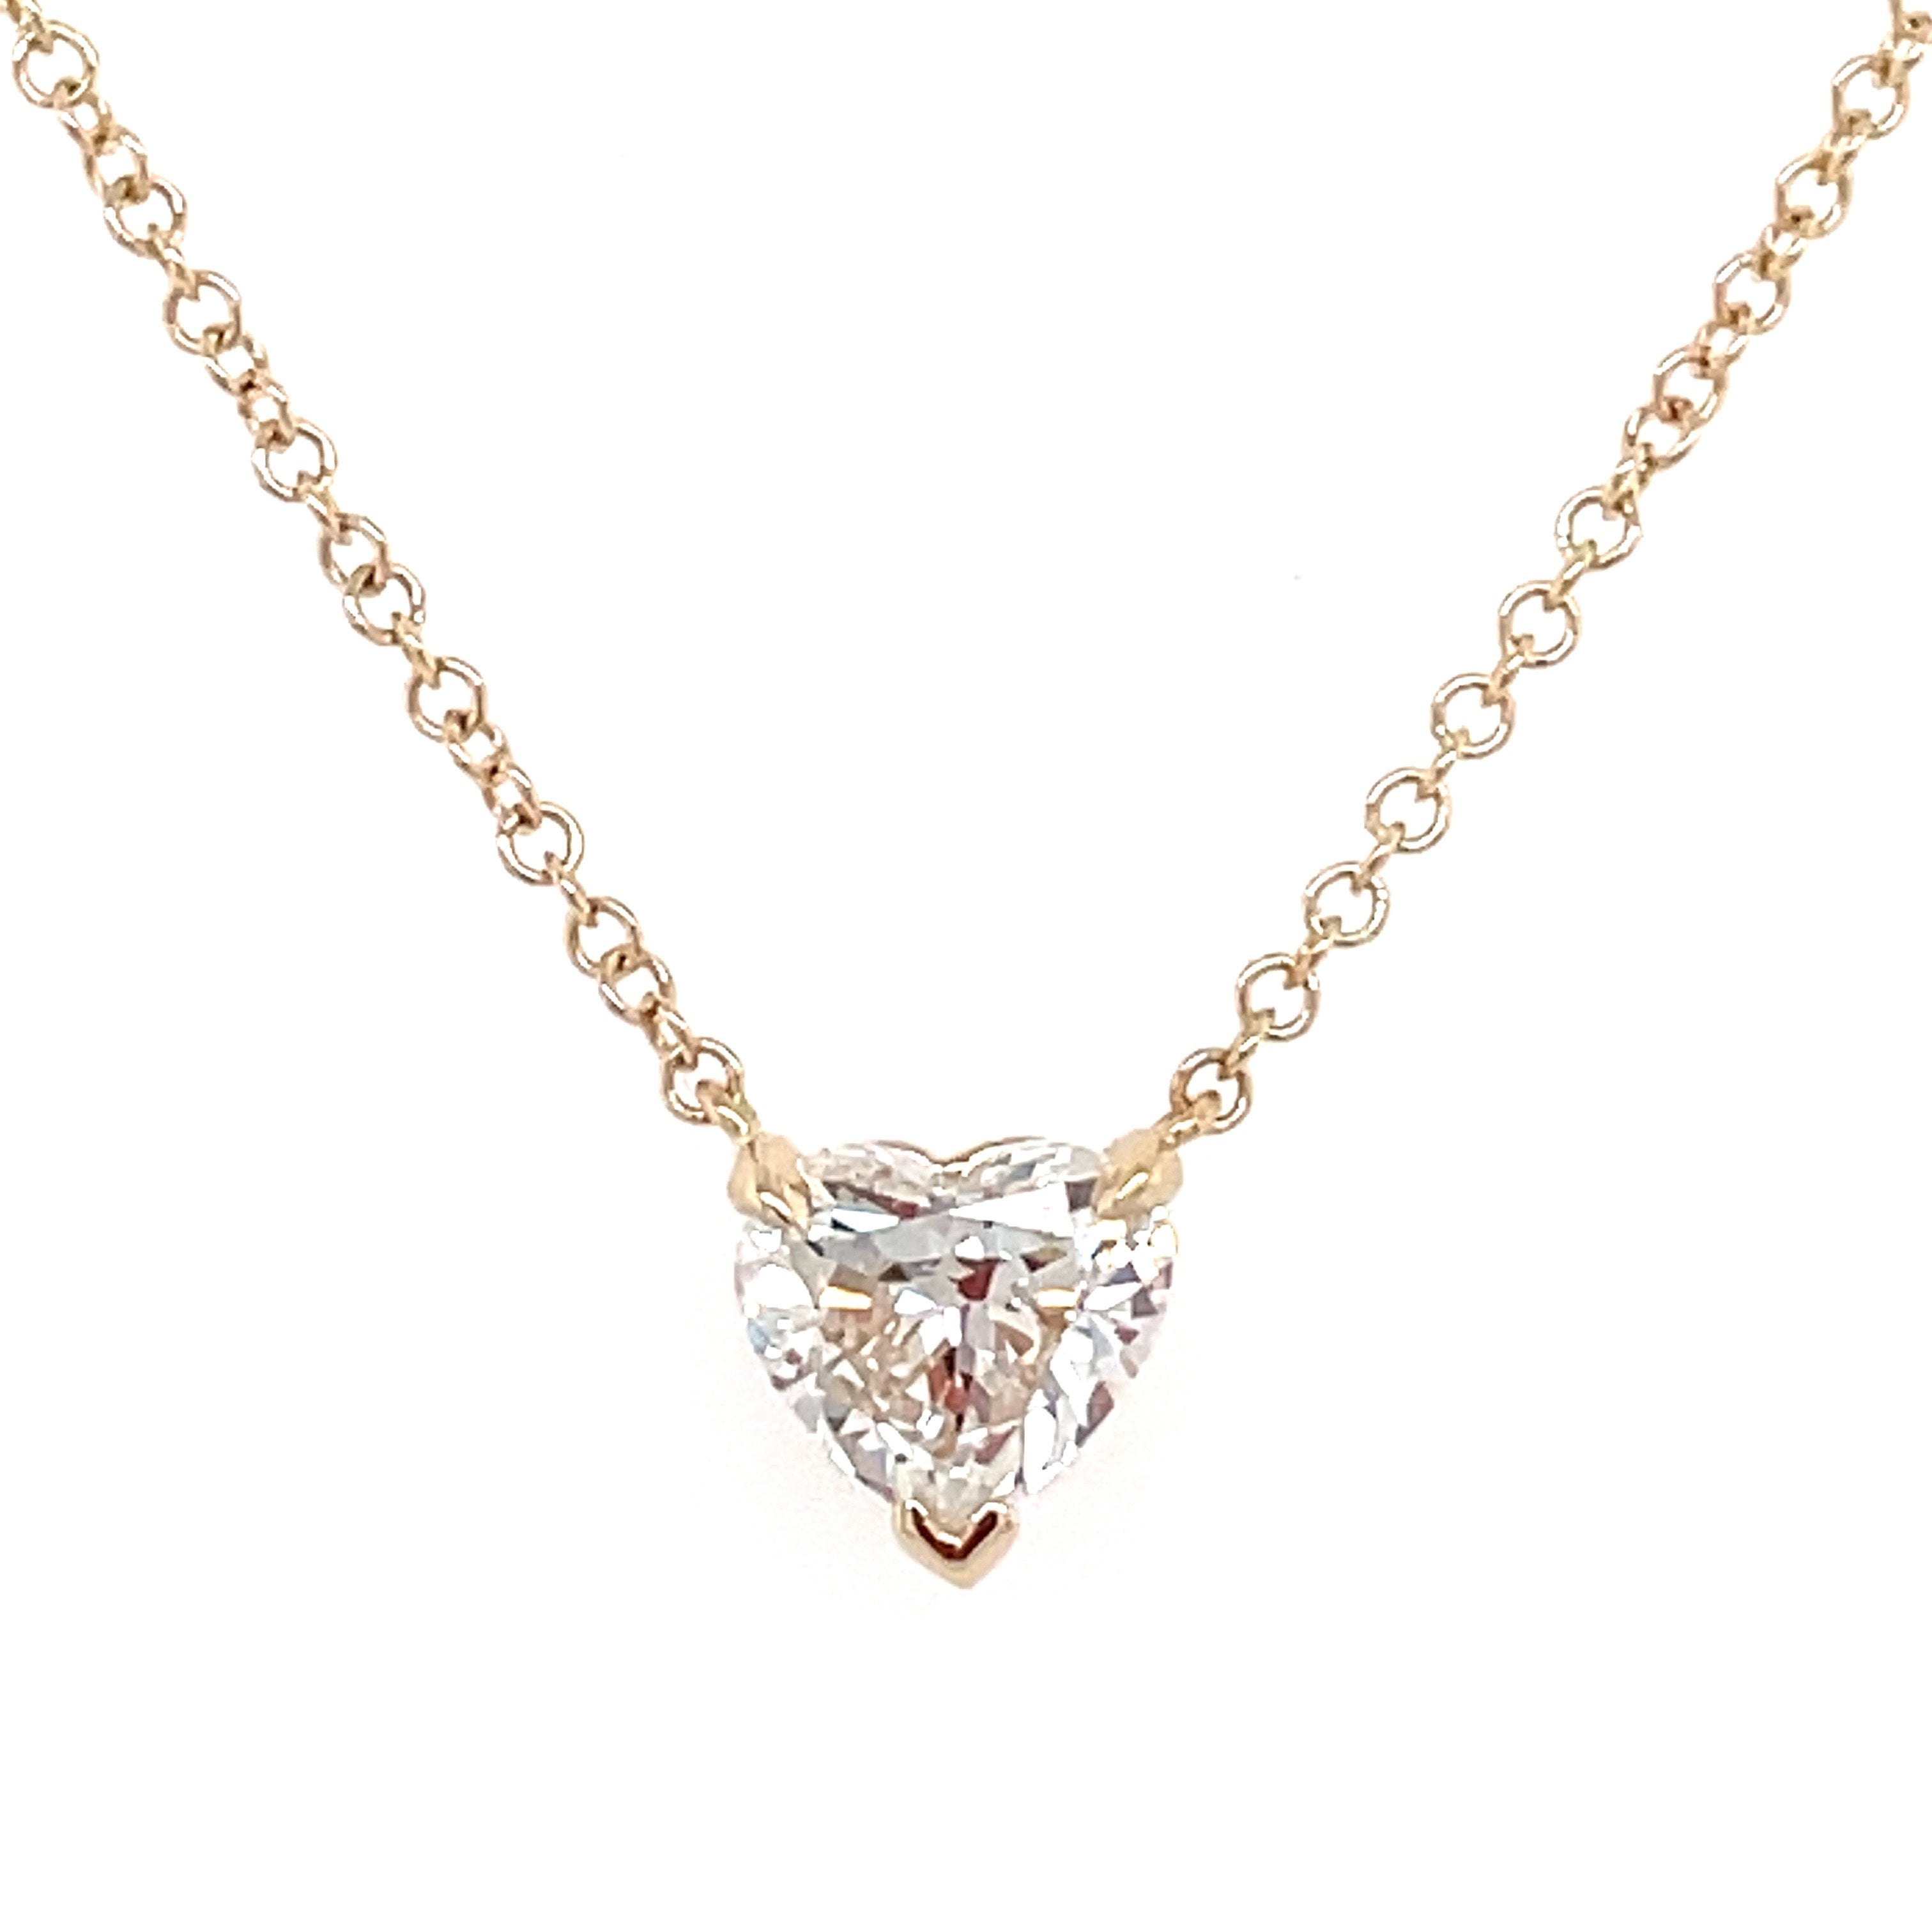 14K Gold Floating Heart Shaped Diamond Necklace 0.50 / Yellow Gold